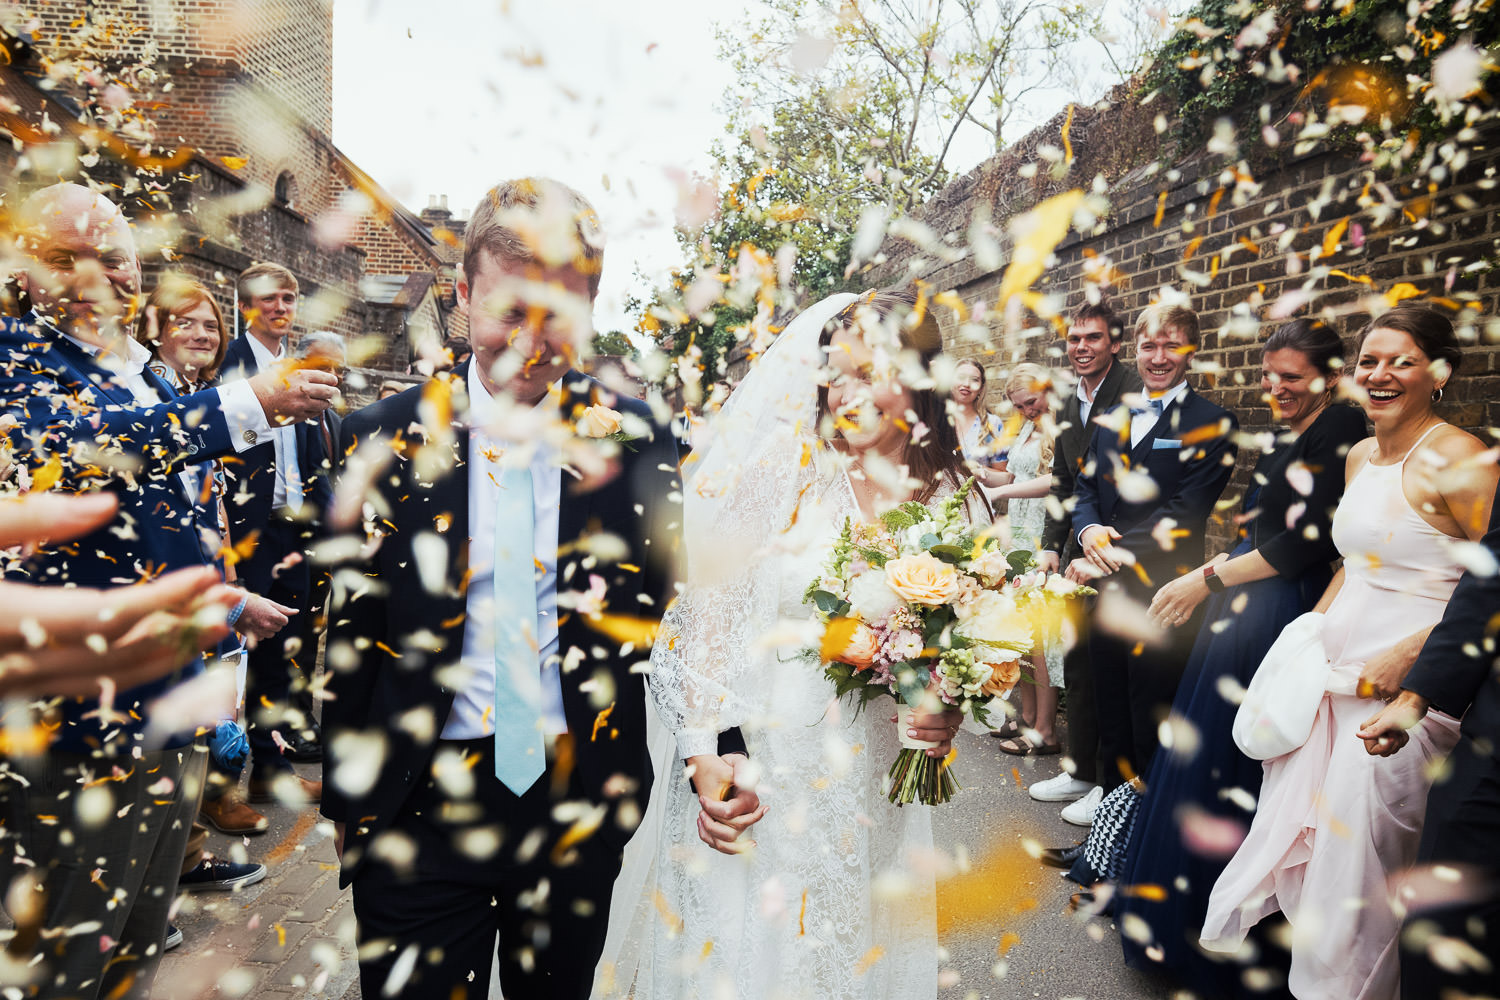 A bride and groom make their way through a confetti tunnel. The confetti is obscuring their faces. After their wedding at St Peter's Church off Church Lane, Petersham Rd, Richmond TW10 7AB.